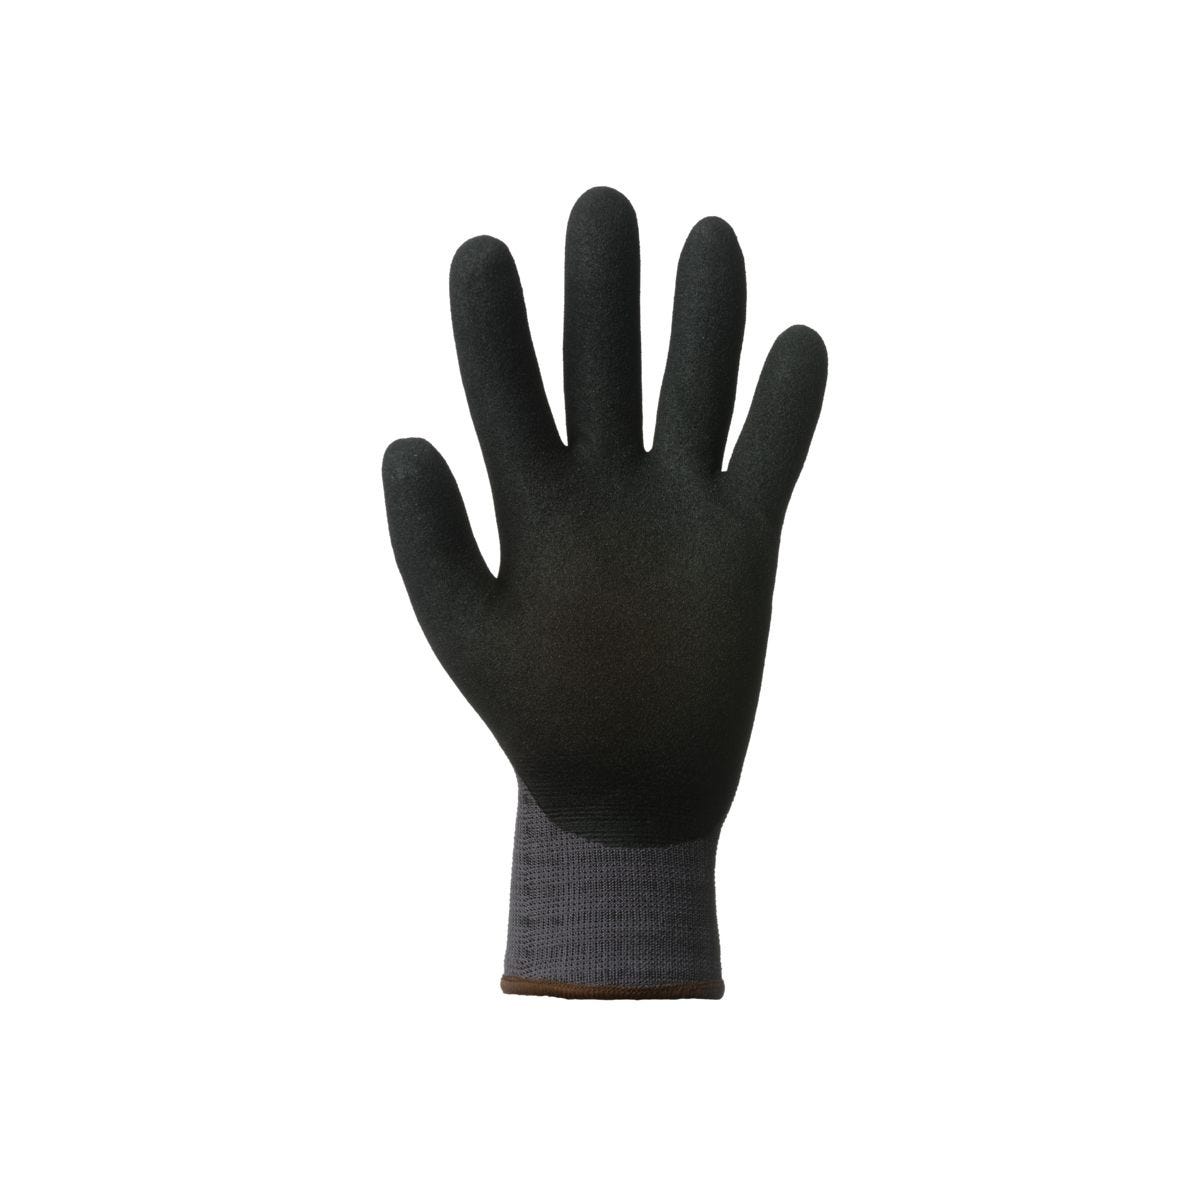 Gants EUROGRIP 15N500 dble enduction nitrile paume - Coverguard - Taille XS-6 1